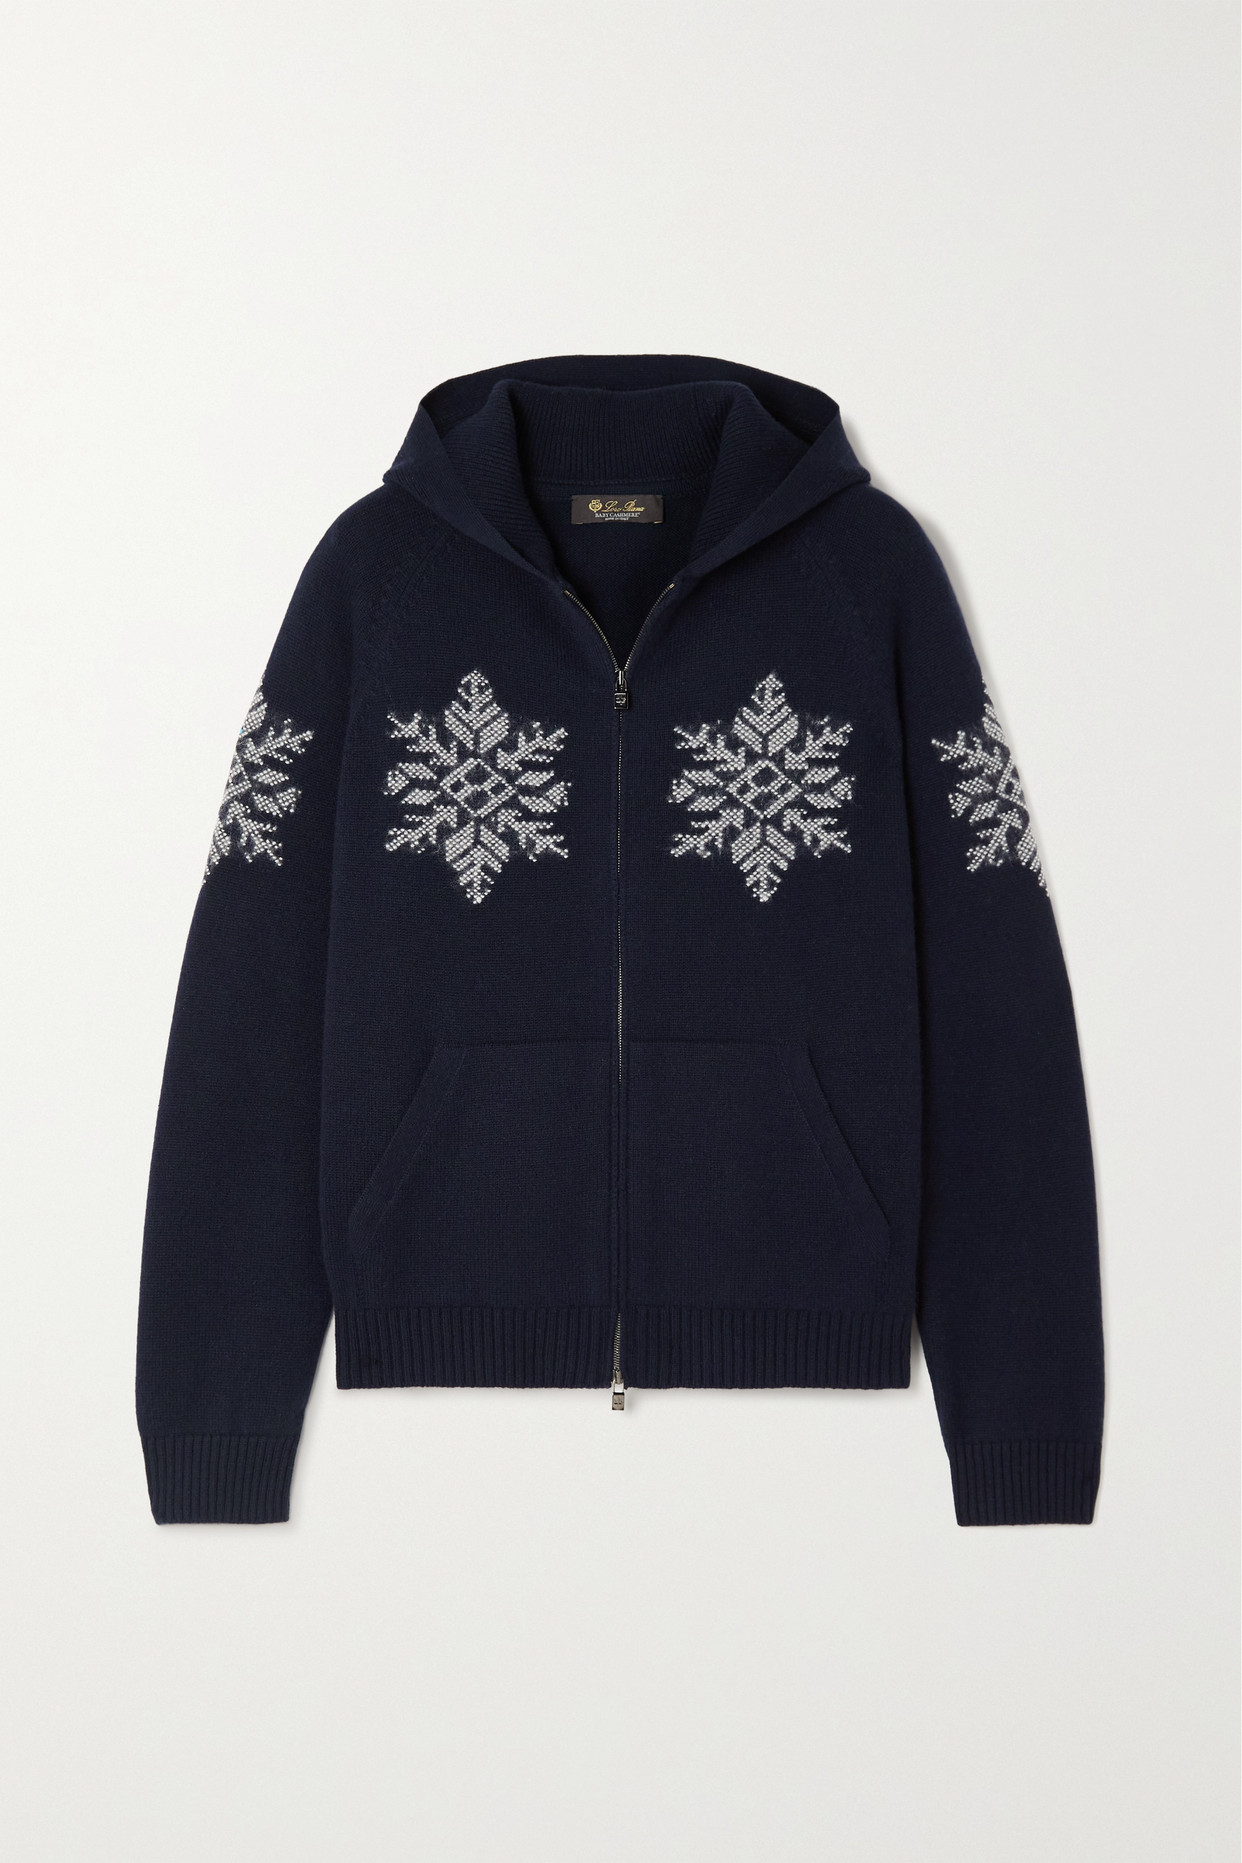 Loro Piana - Embroidered Cashmere Zip-up Hoodie - Navy - IT48